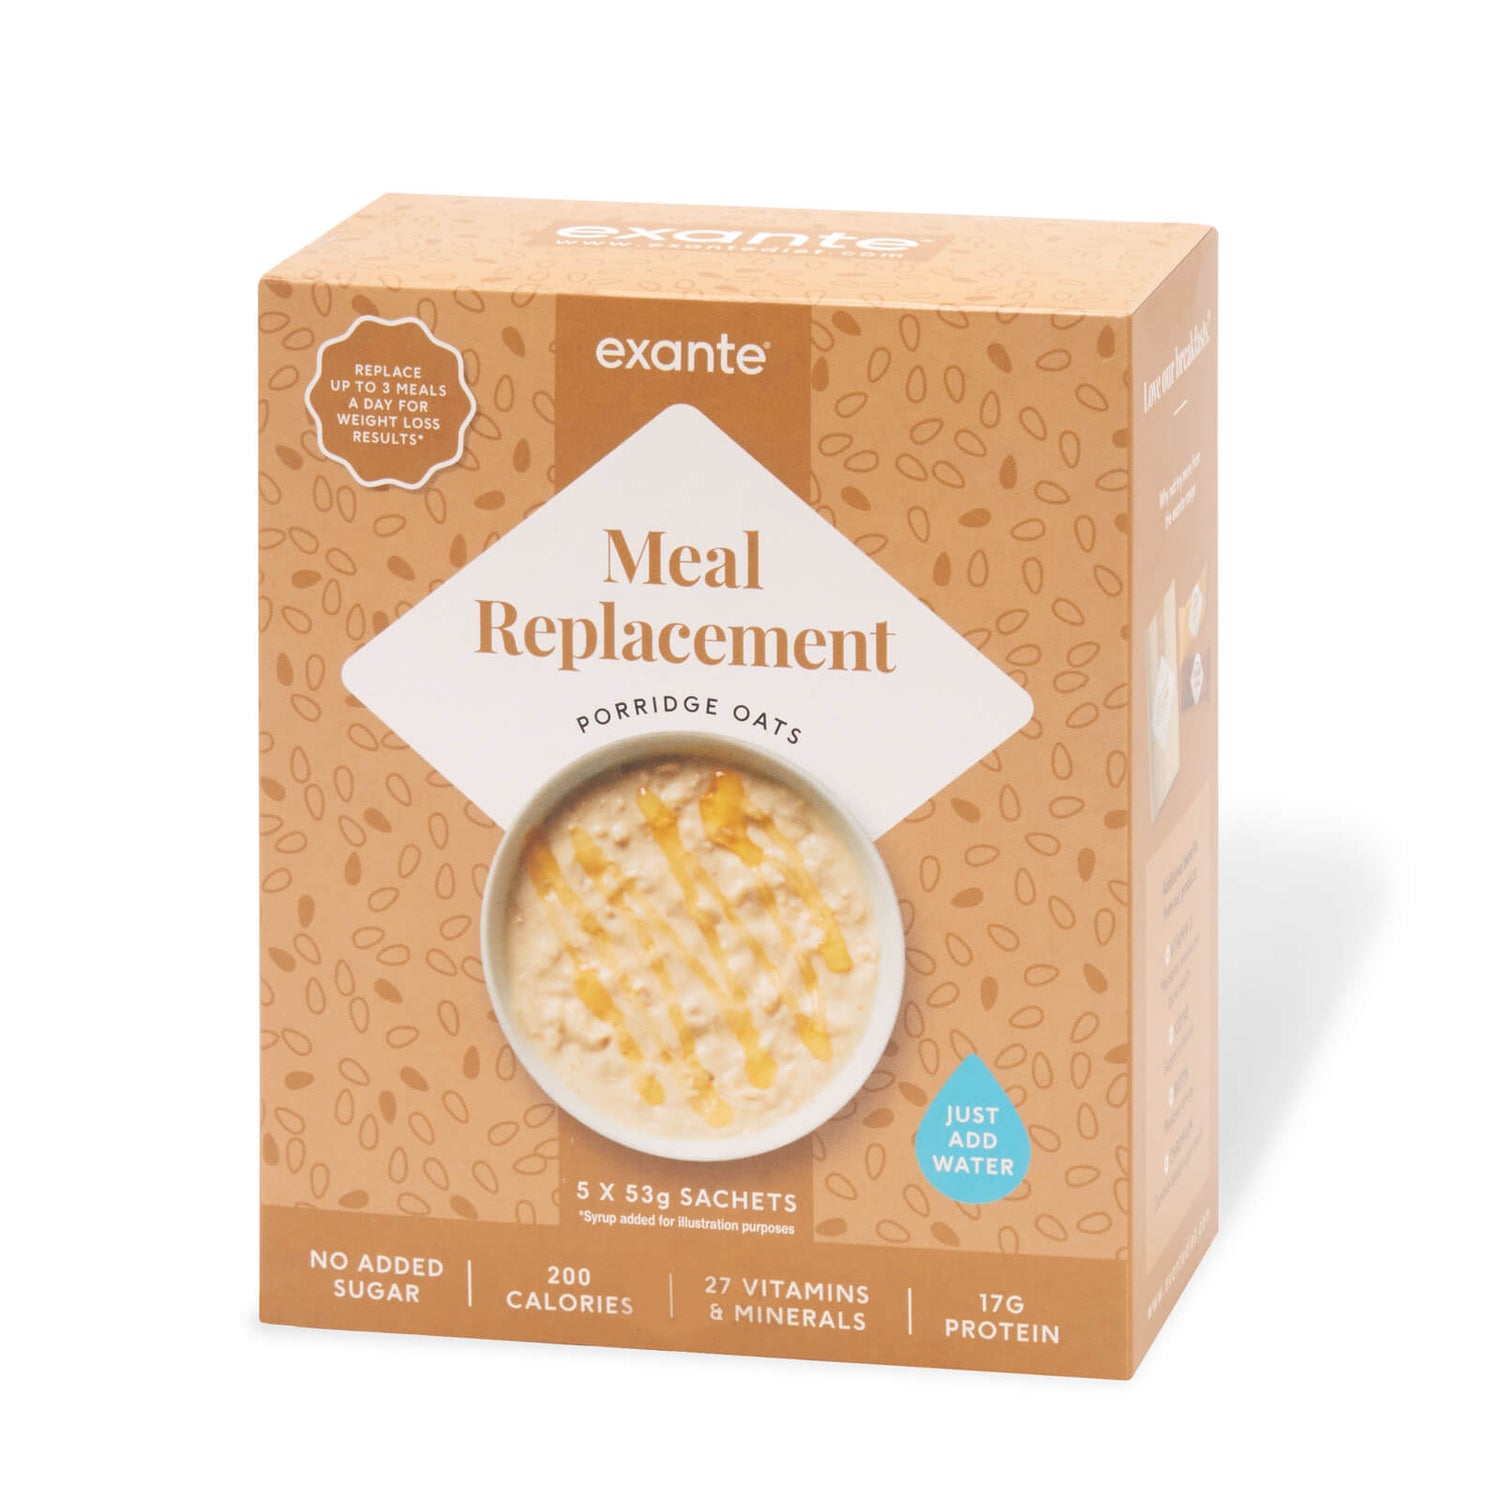 Meal Replacement Porridge Oats, Pack of 5